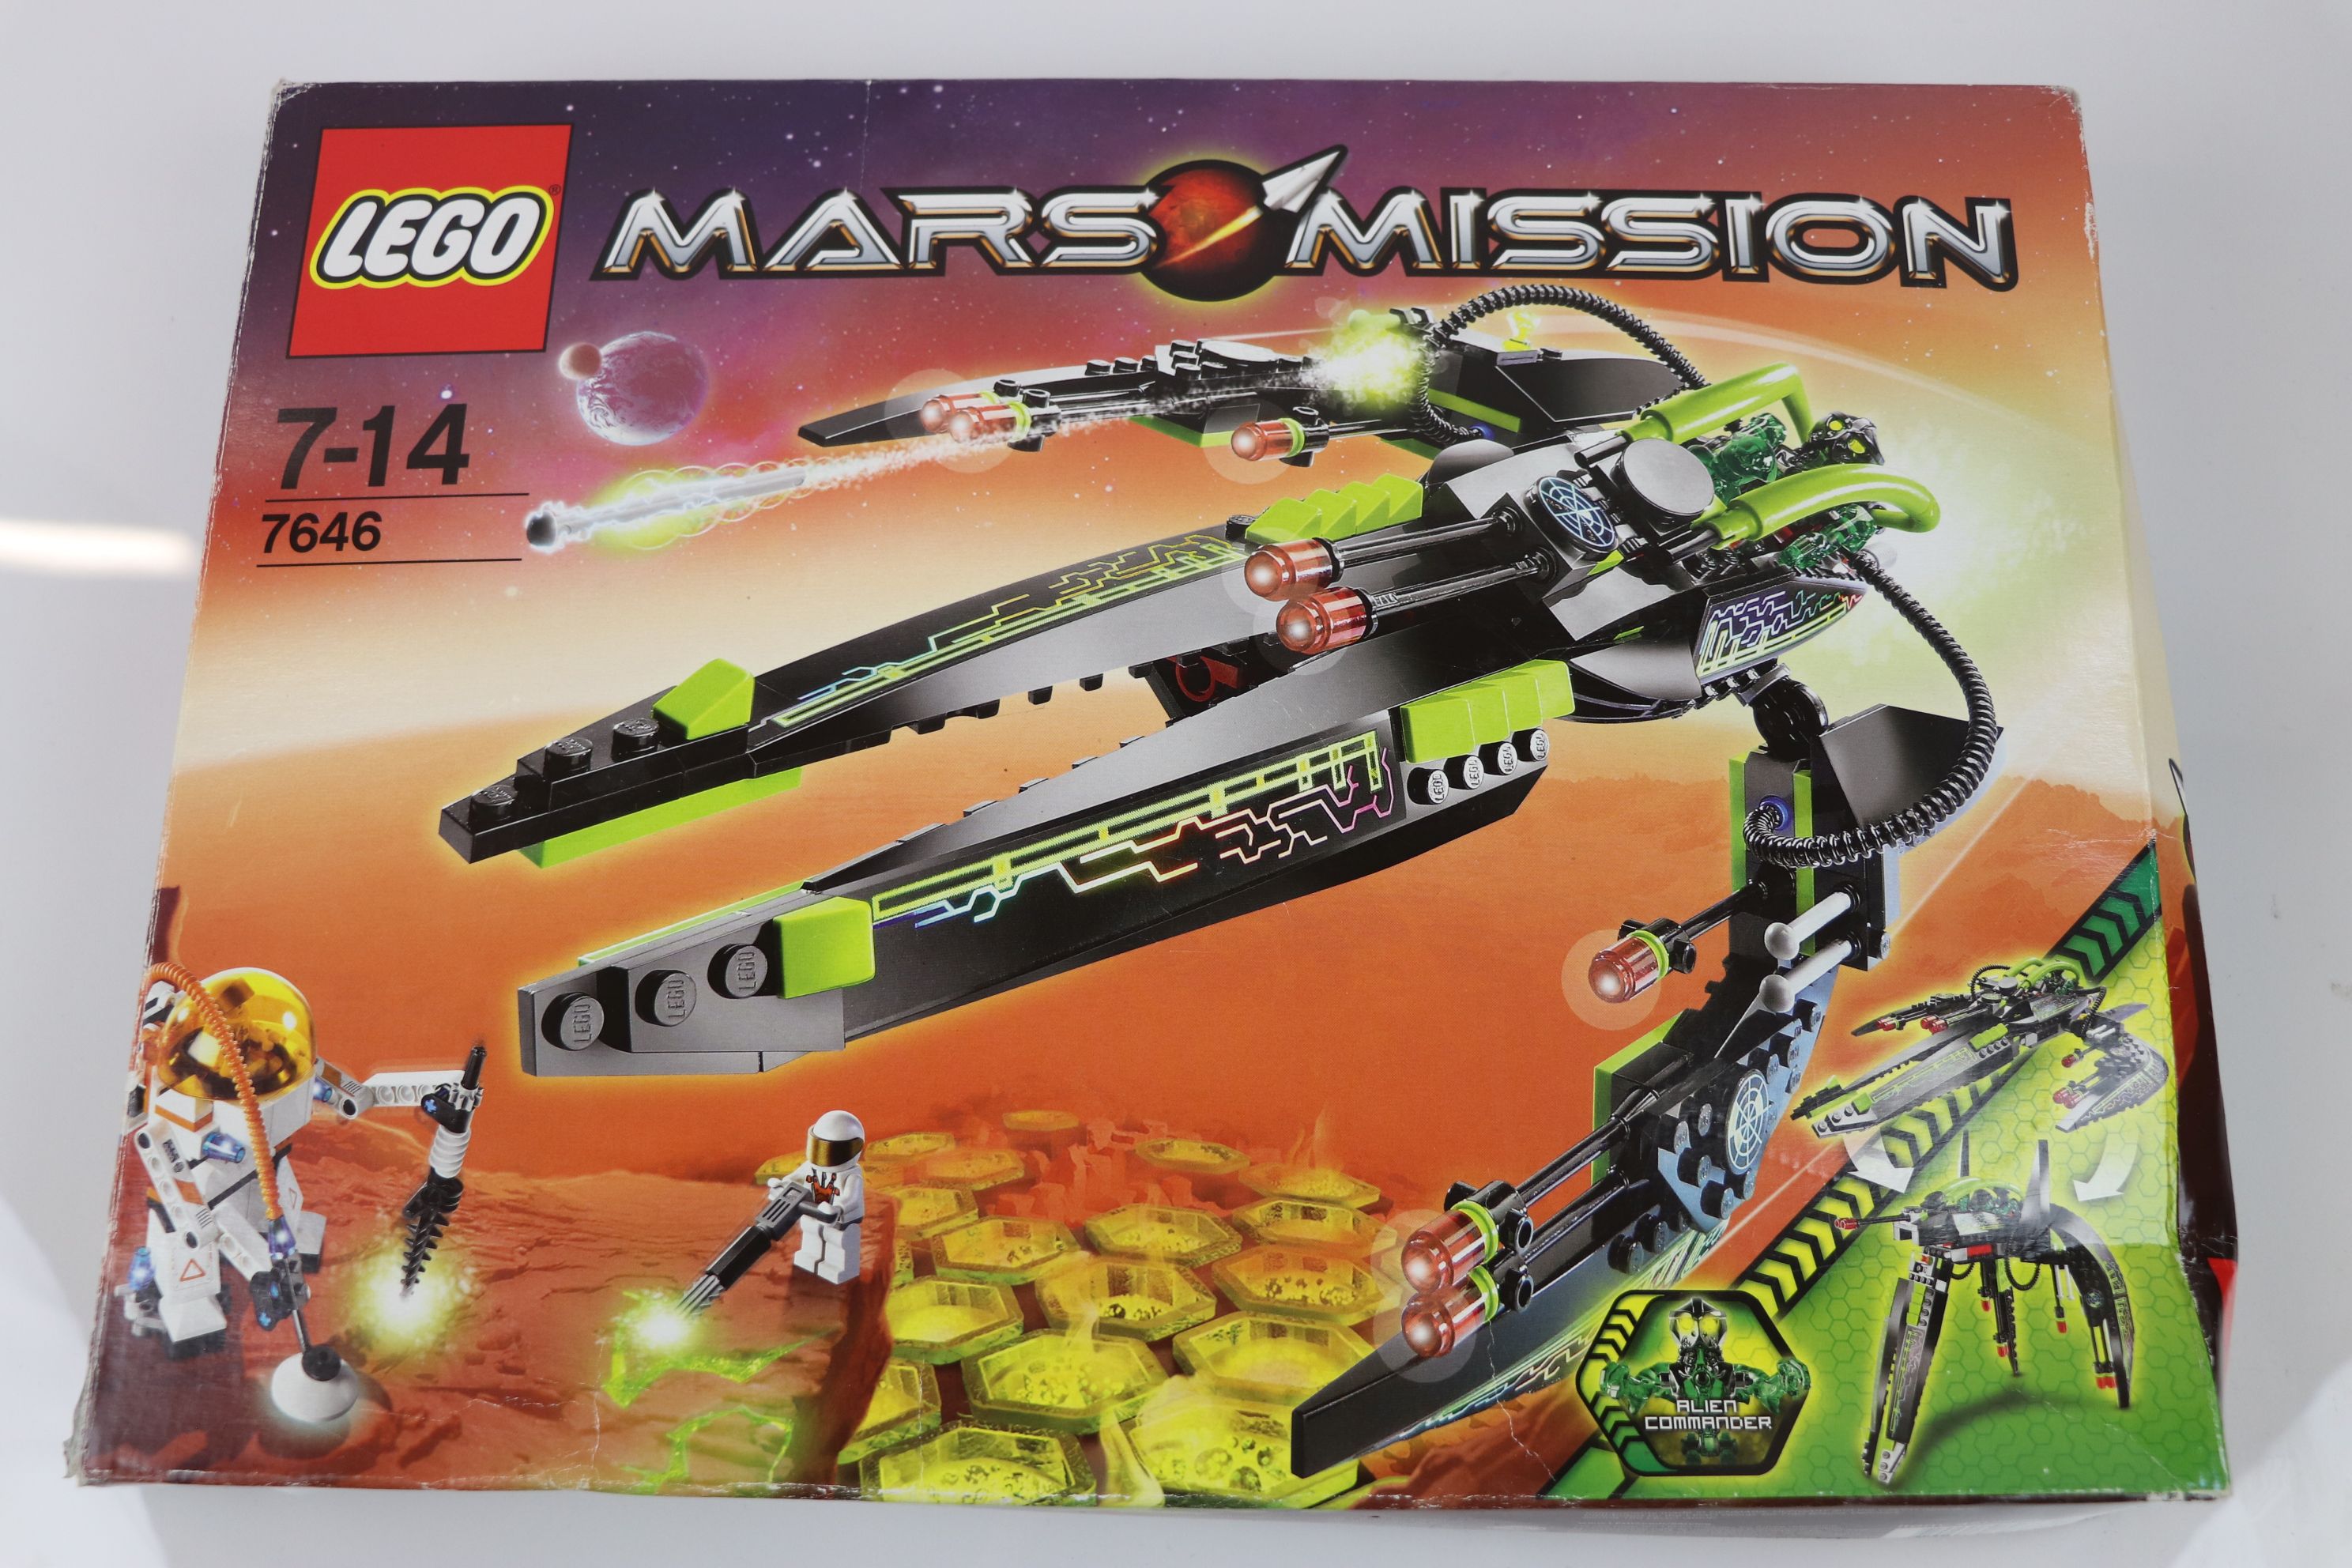 Six boxed Lego Mars Mission sets to include 7693, 7646, 7697, 7648, 7695 & 7694, plus an unboxed - Image 3 of 10